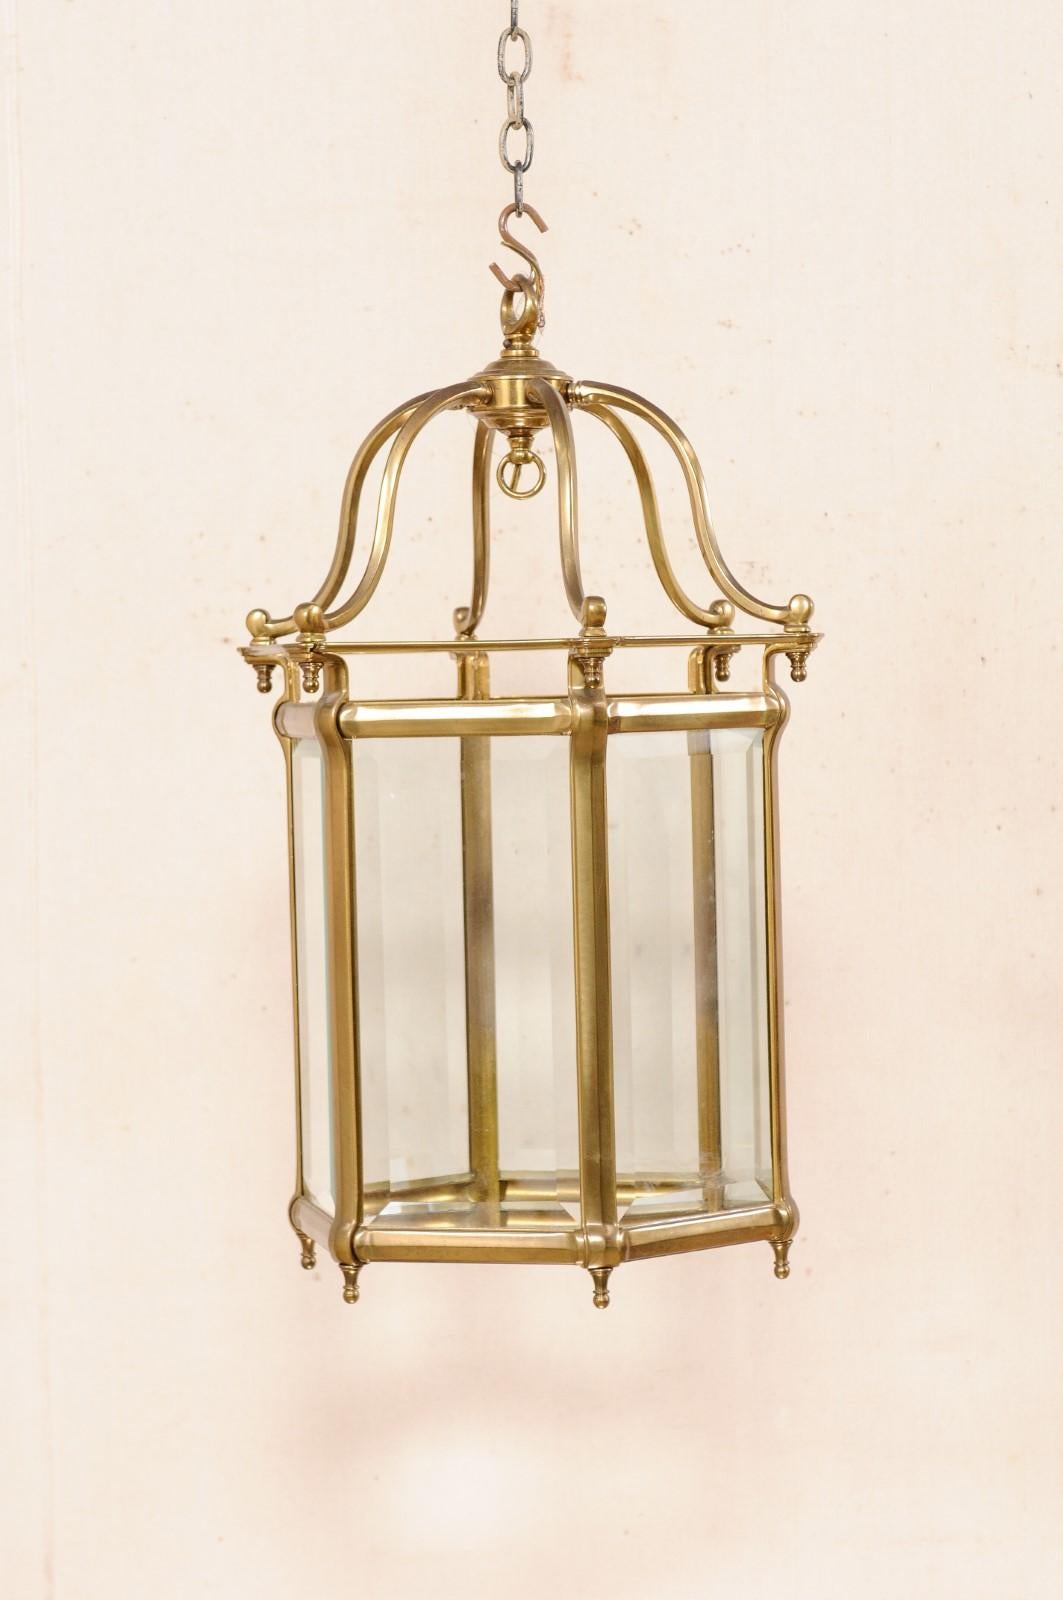 A single neoclassical style brass lantern. This vintage lantern is American-made with a nod to Neoclassism. It features a domed top, created from armature, a hexagonal body with beveled glass panels, and petite ball finial accents adorning the top